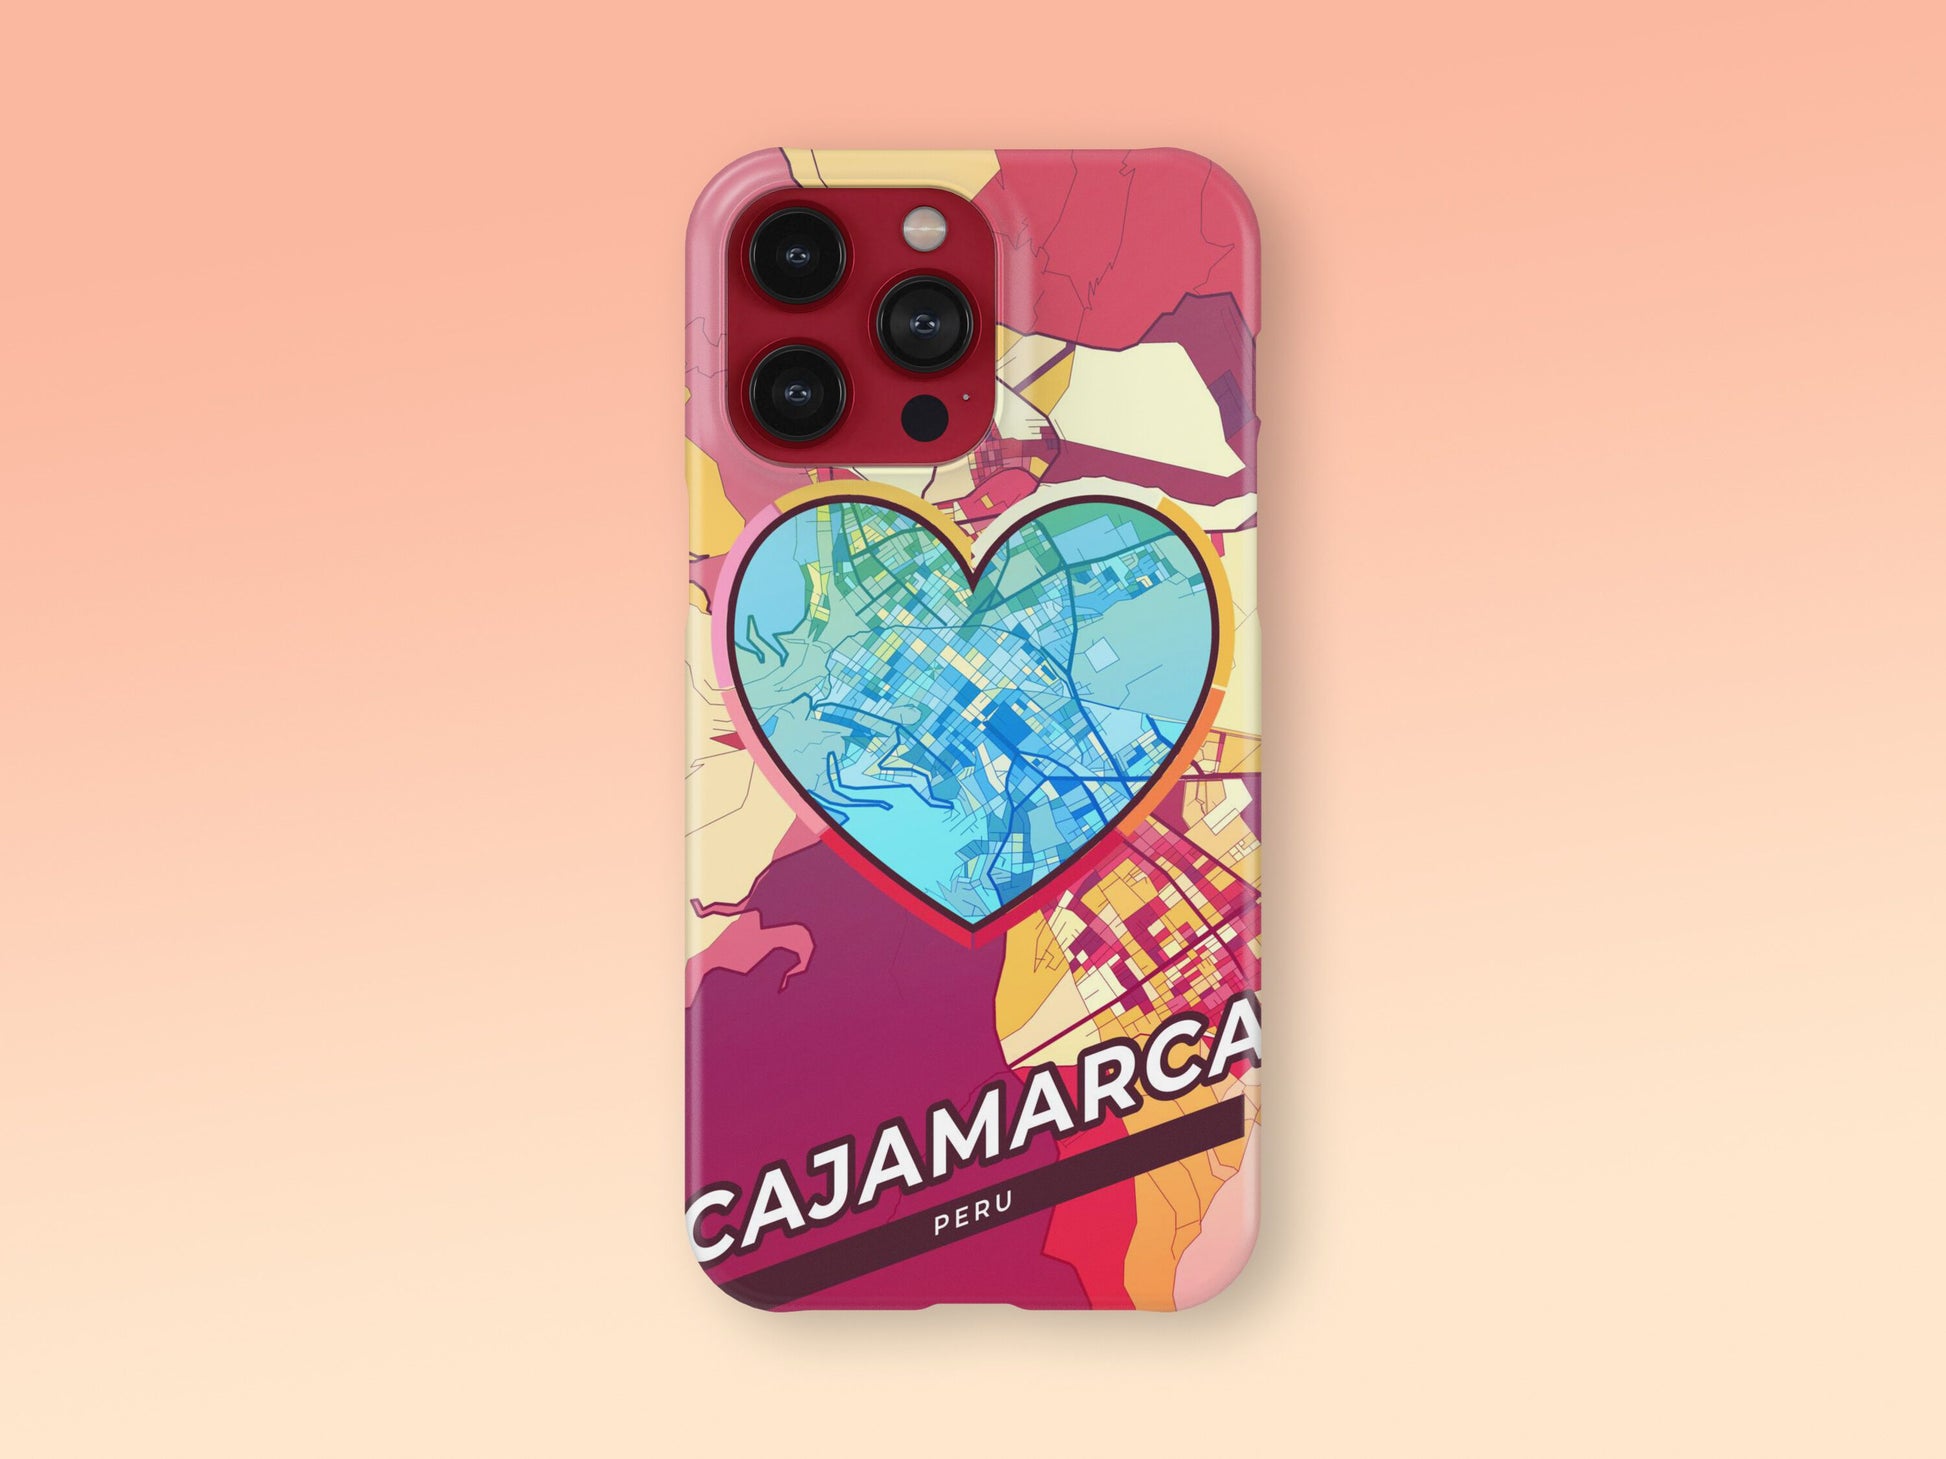 Cajamarca Peru slim phone case with colorful icon. Birthday, wedding or housewarming gift. Couple match cases. 2